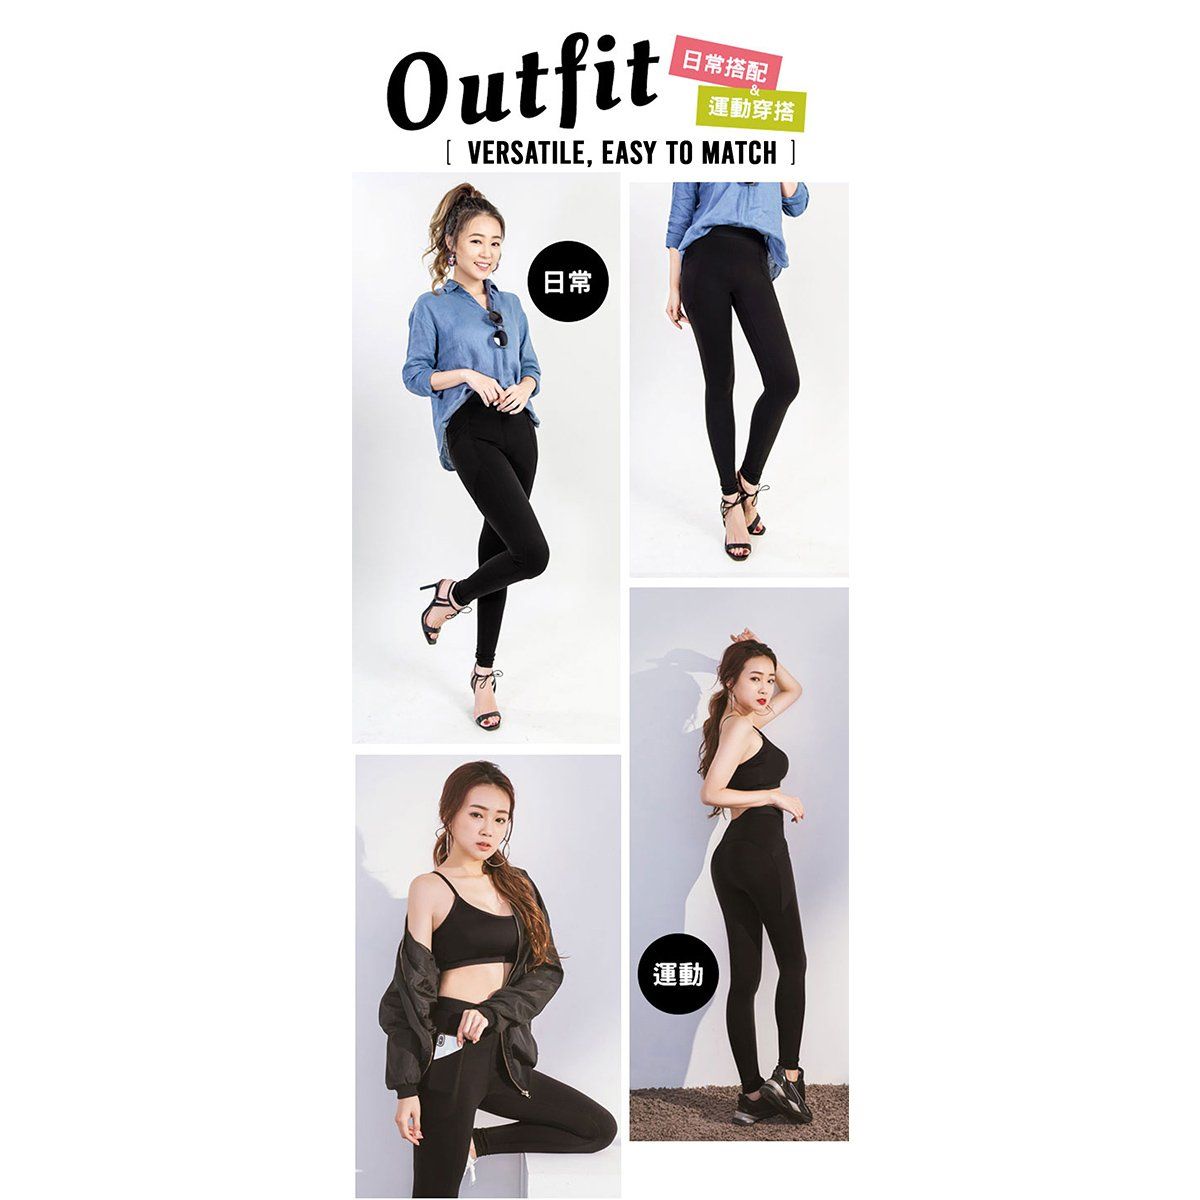 ($14.90 Only) Eheart Multi-Function Support Leggings with Pocket - Bloom Concept